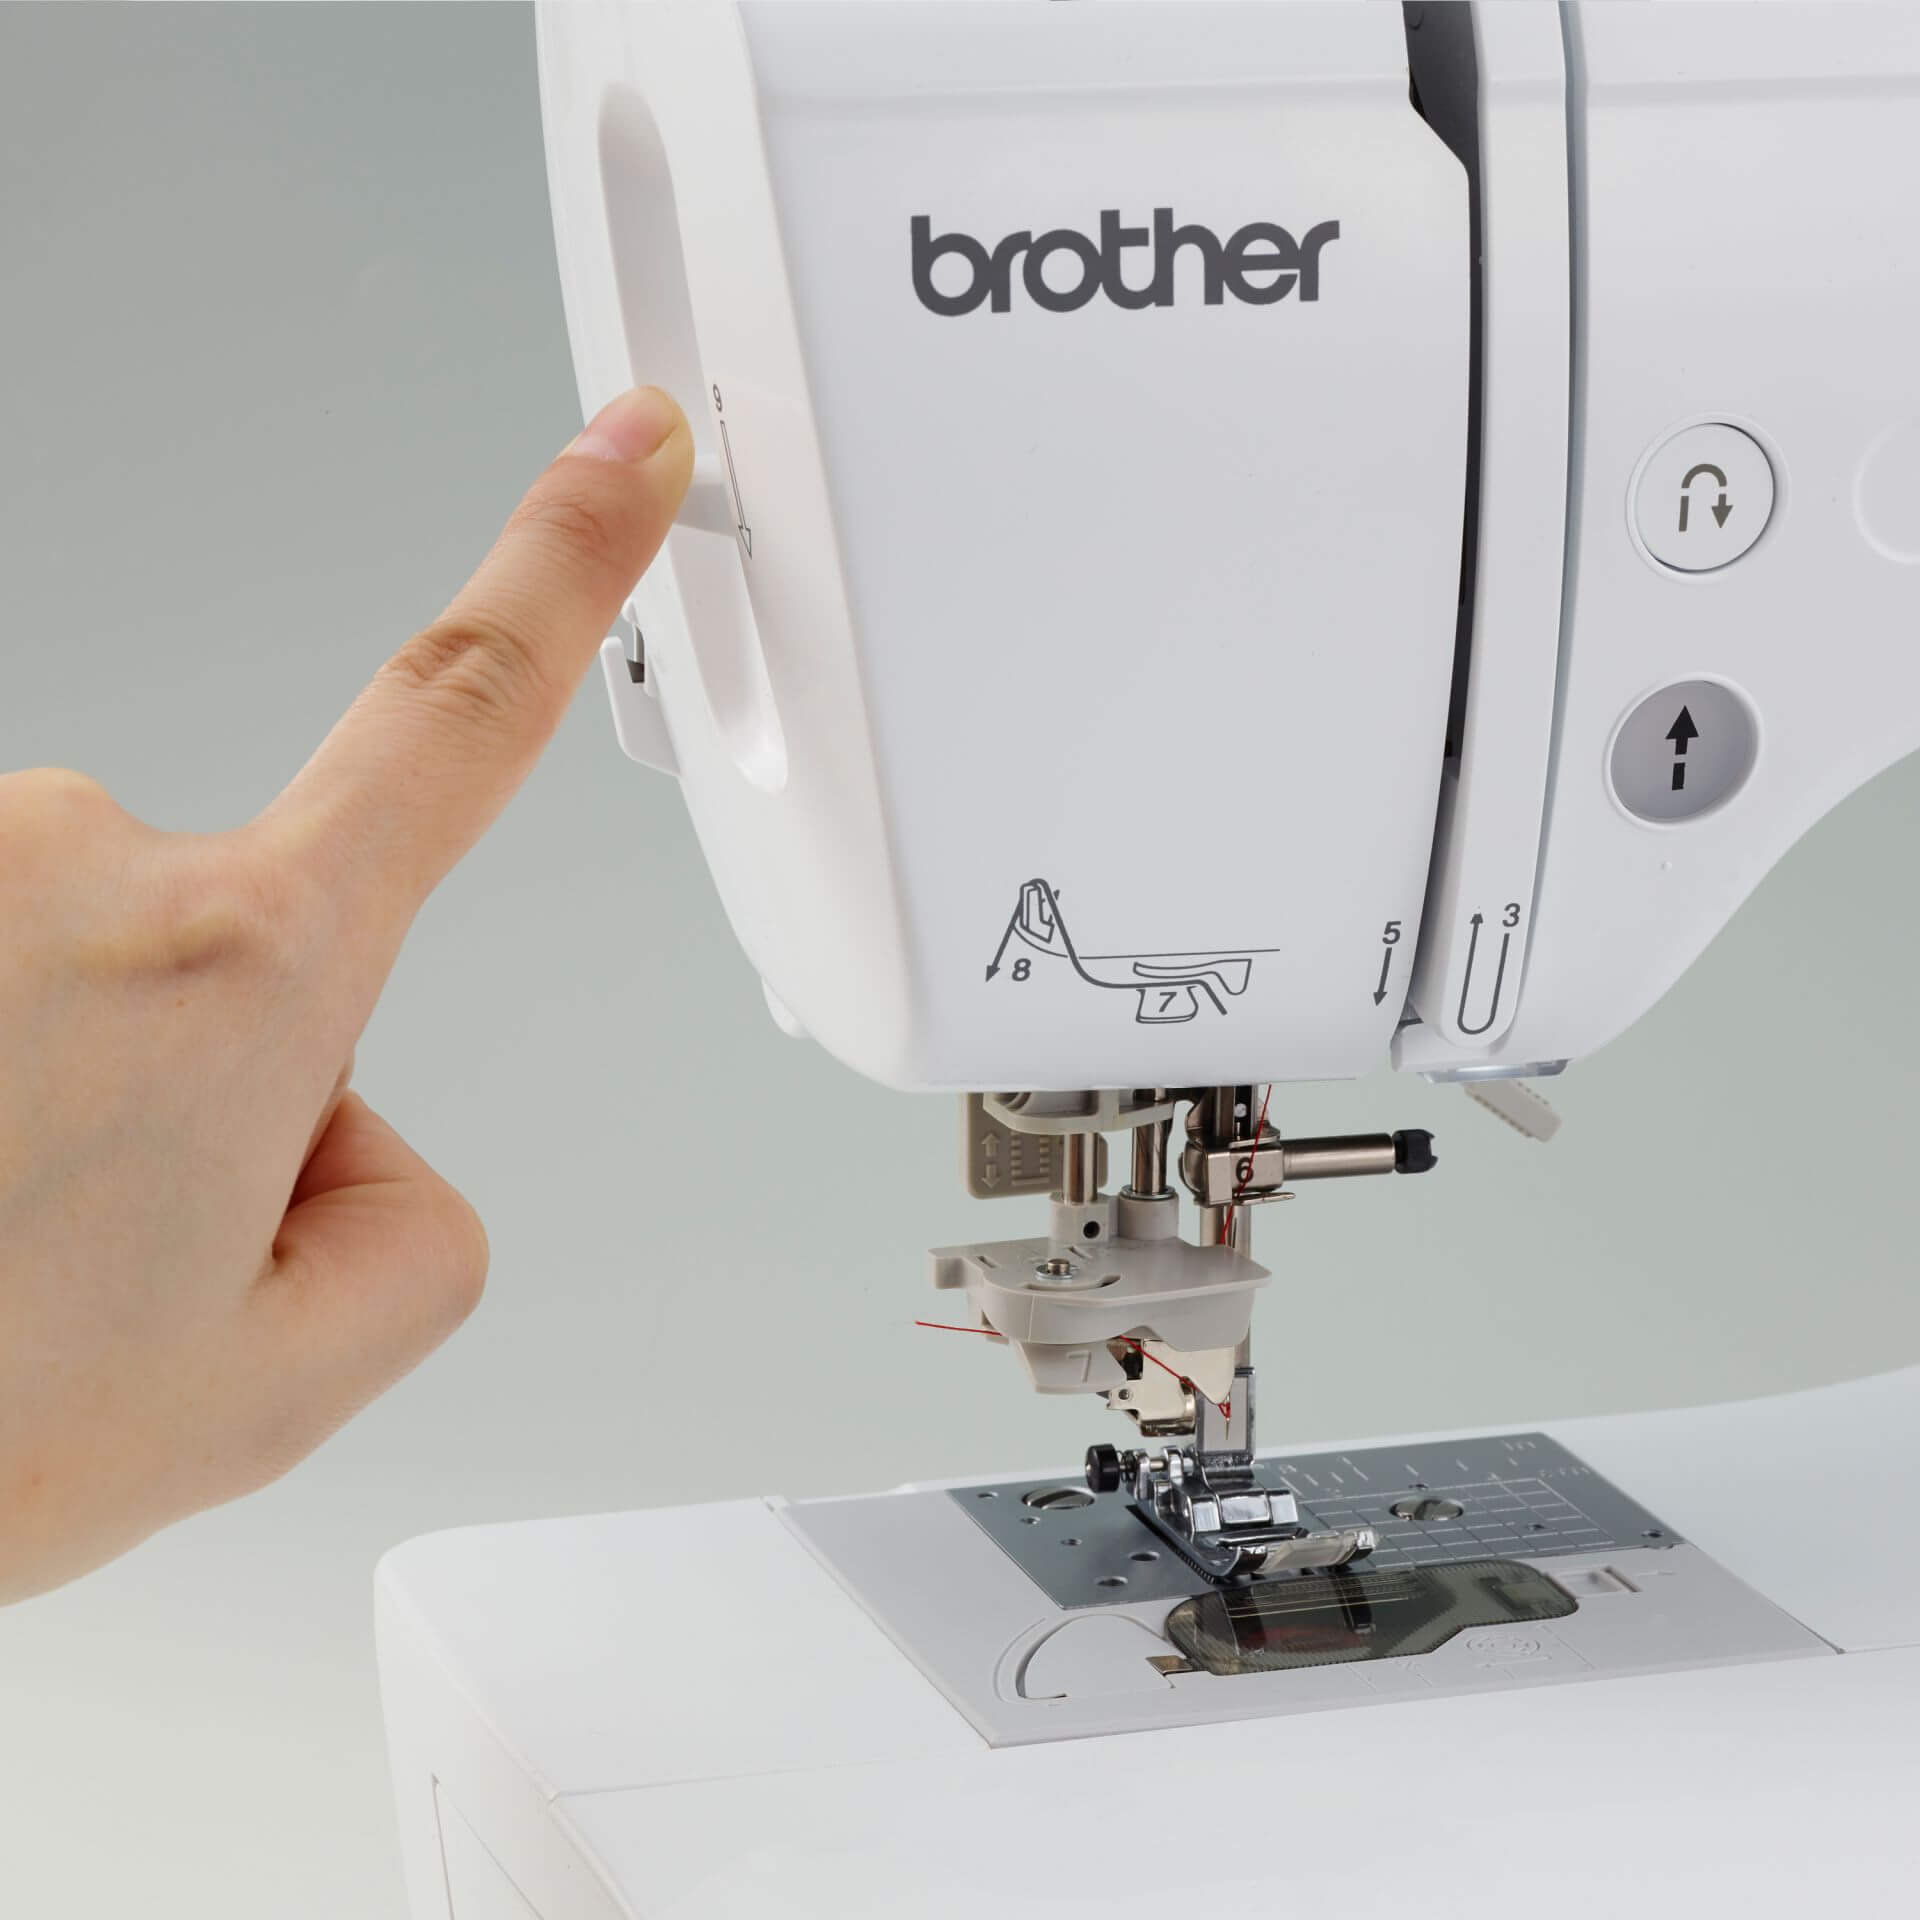 Brother PE535 Reviews With Pros And Cons » EMDIGITIZER